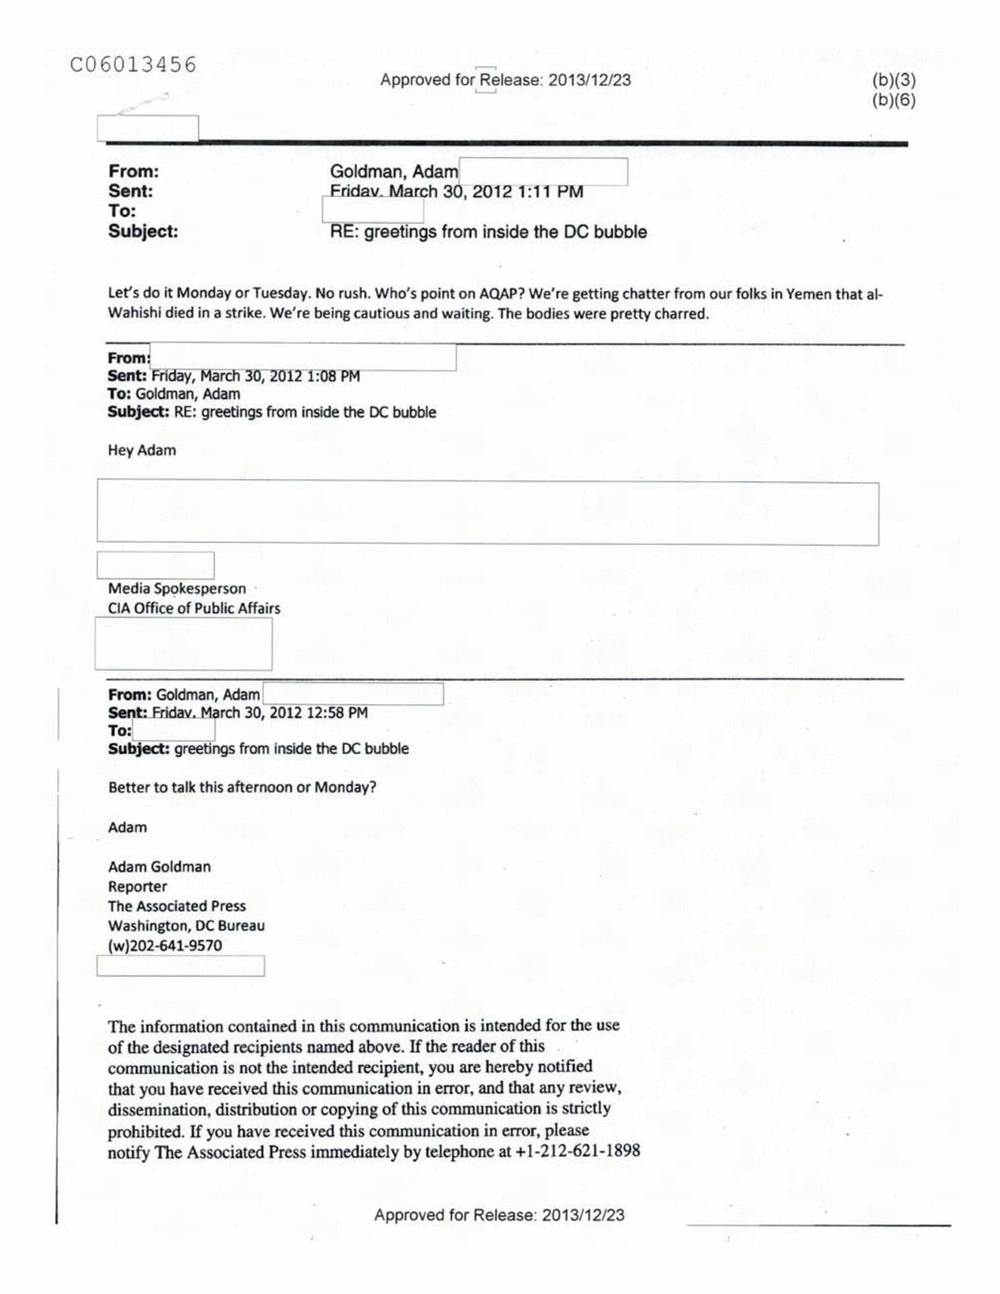 Page 323 from Email Correspondence Between Reporters and CIA Flacks